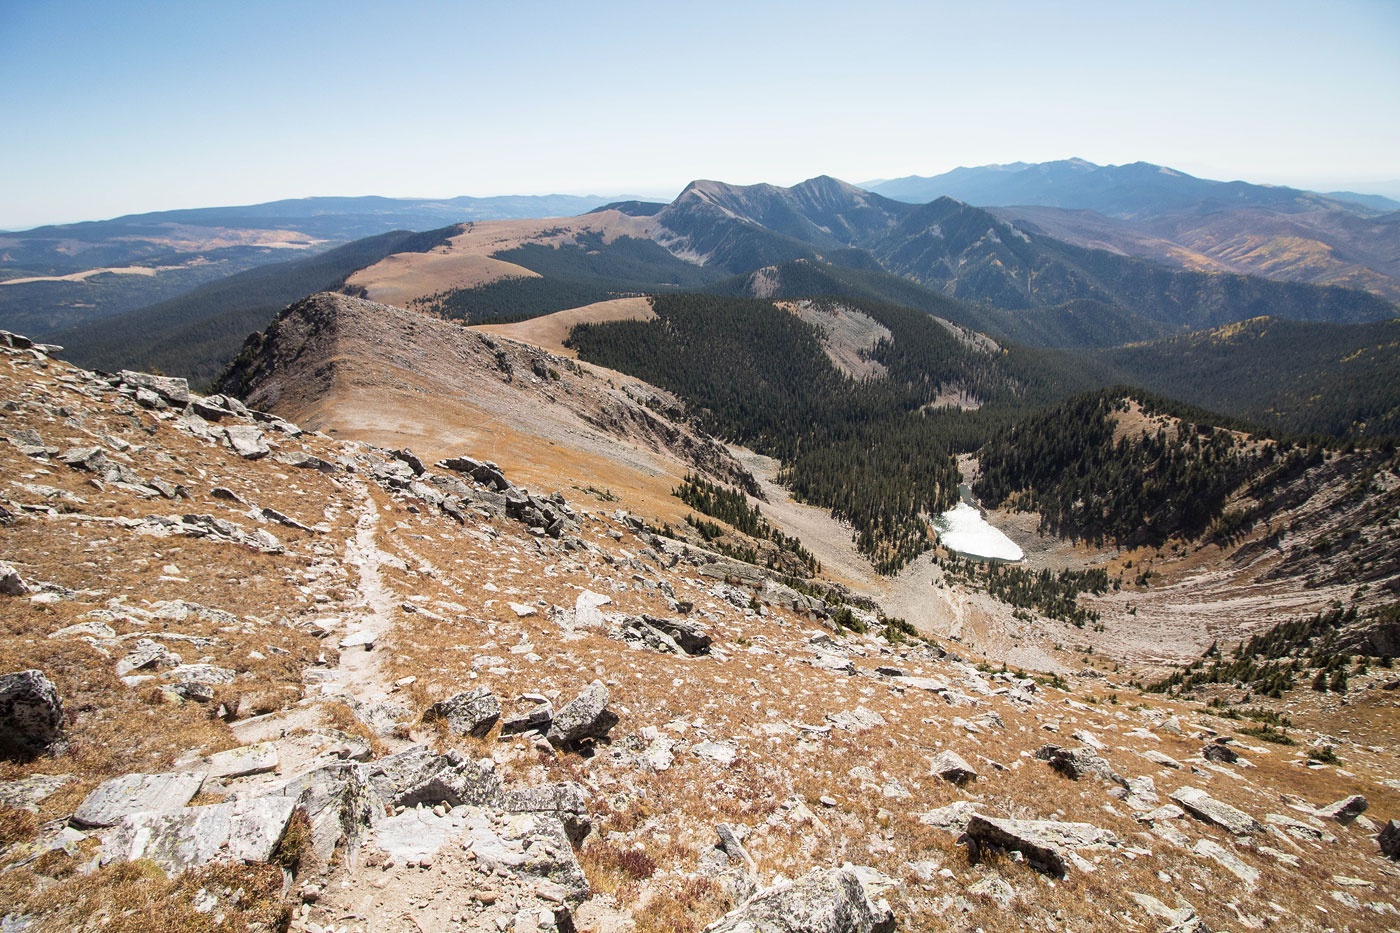 Hike Truchas Peak and Pecos Baldy in Santa Fe National Forest, New Mexico - Stav is Lost